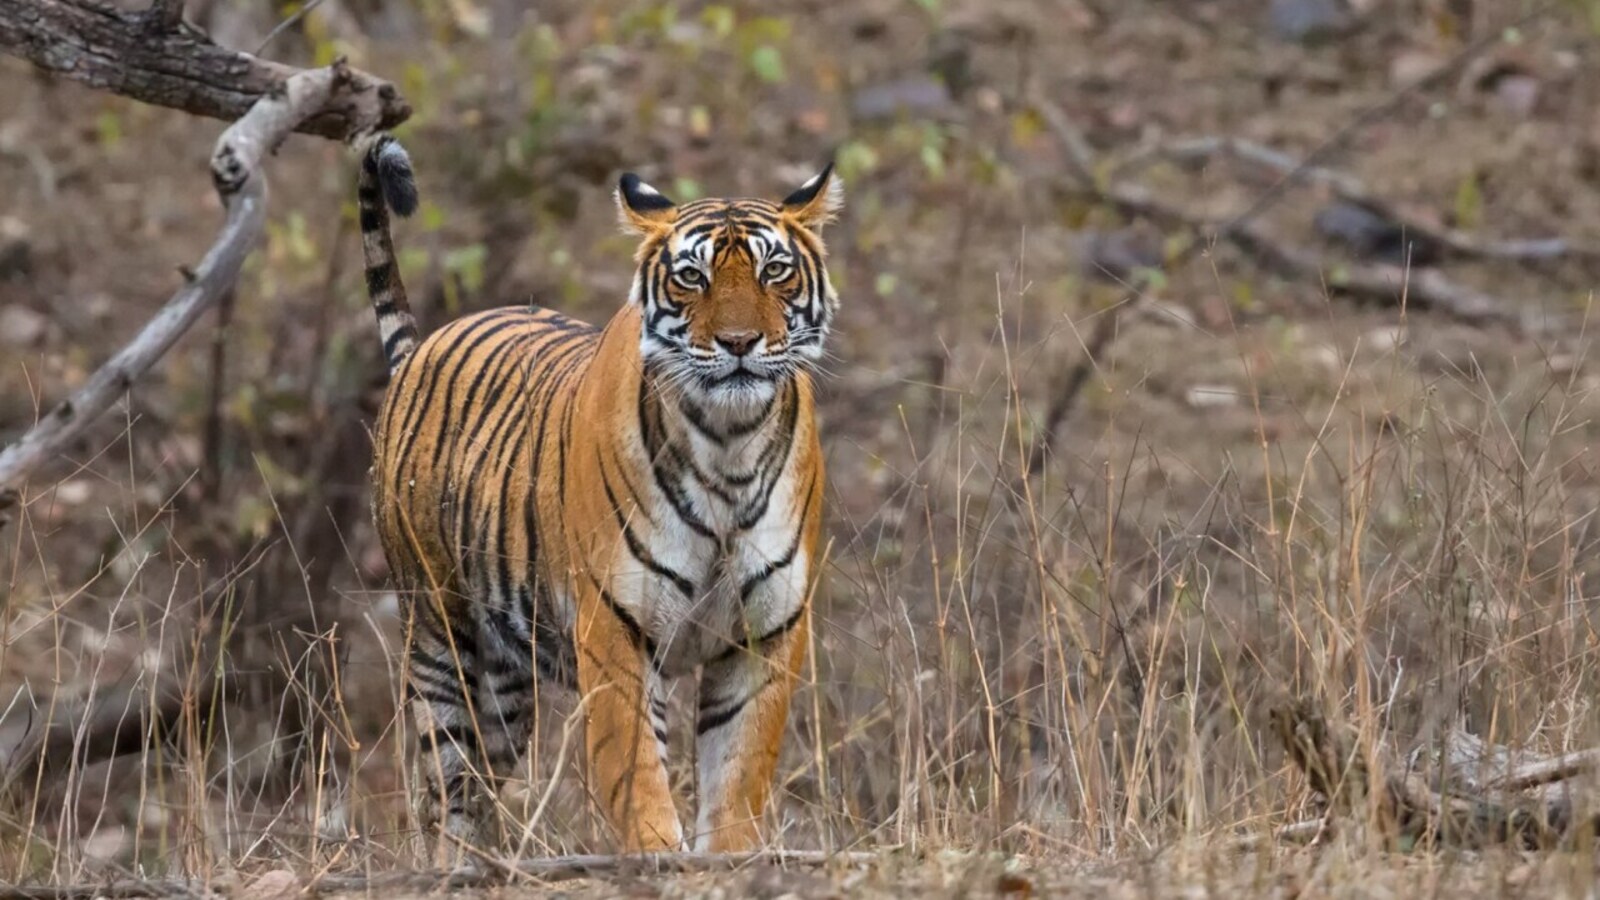 India to help Cambodia's tiger reintroduction programme, say officials